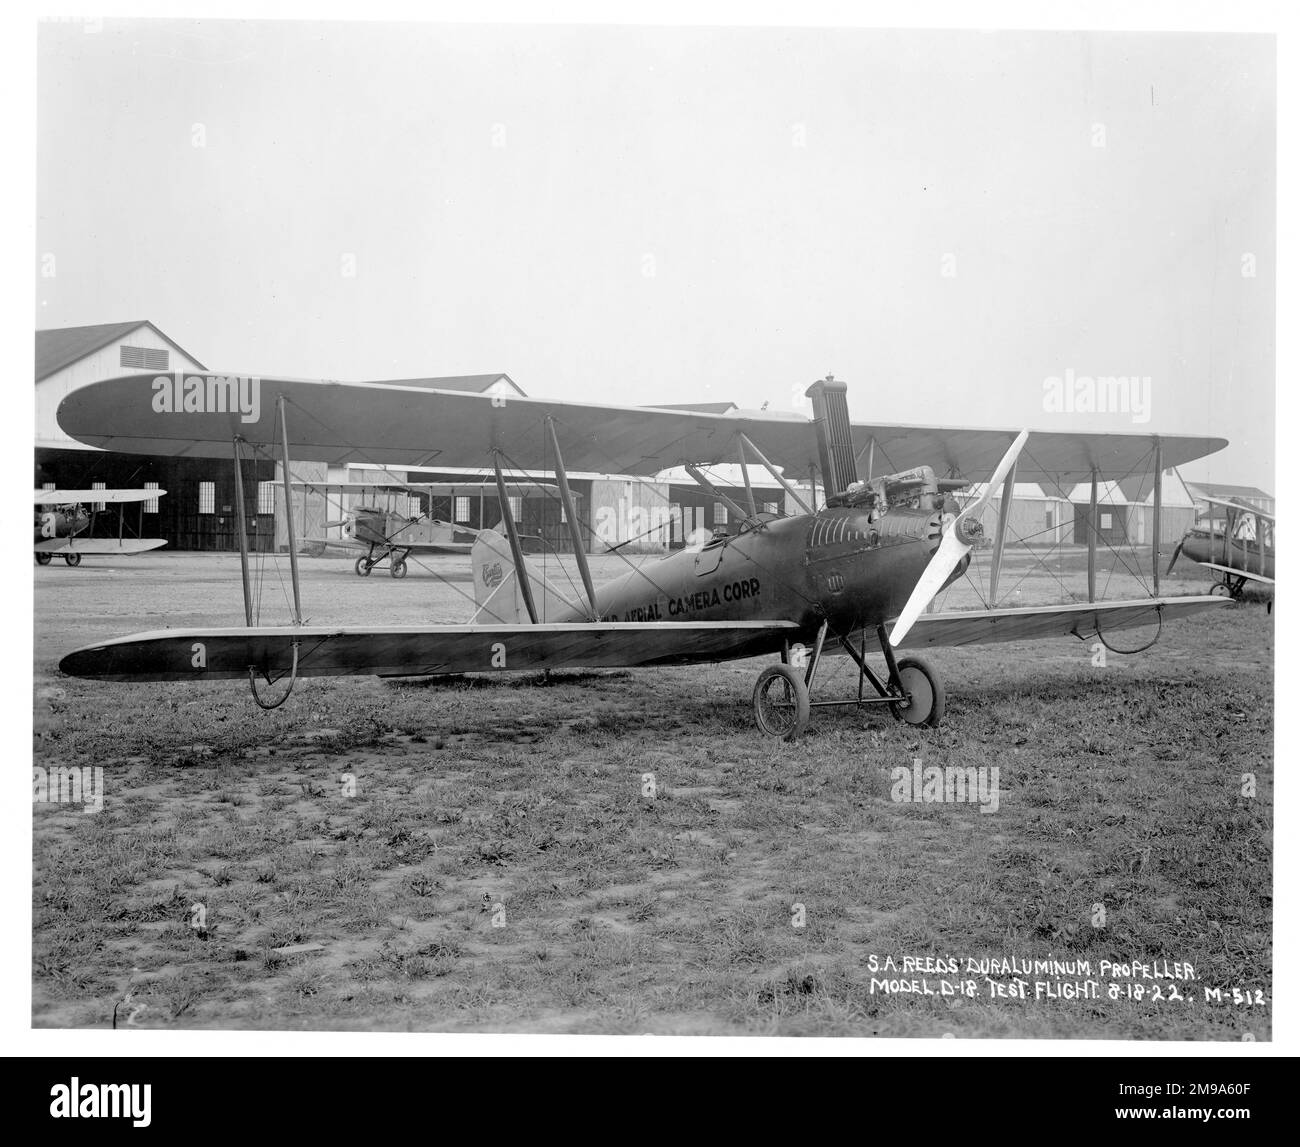 A long-wing Curtiss Oriole, of an aerial photography company, fitted with one of S.A. Reeds patented twisted flat-plate D-18 (Duralumin) propellers. Stock Photo